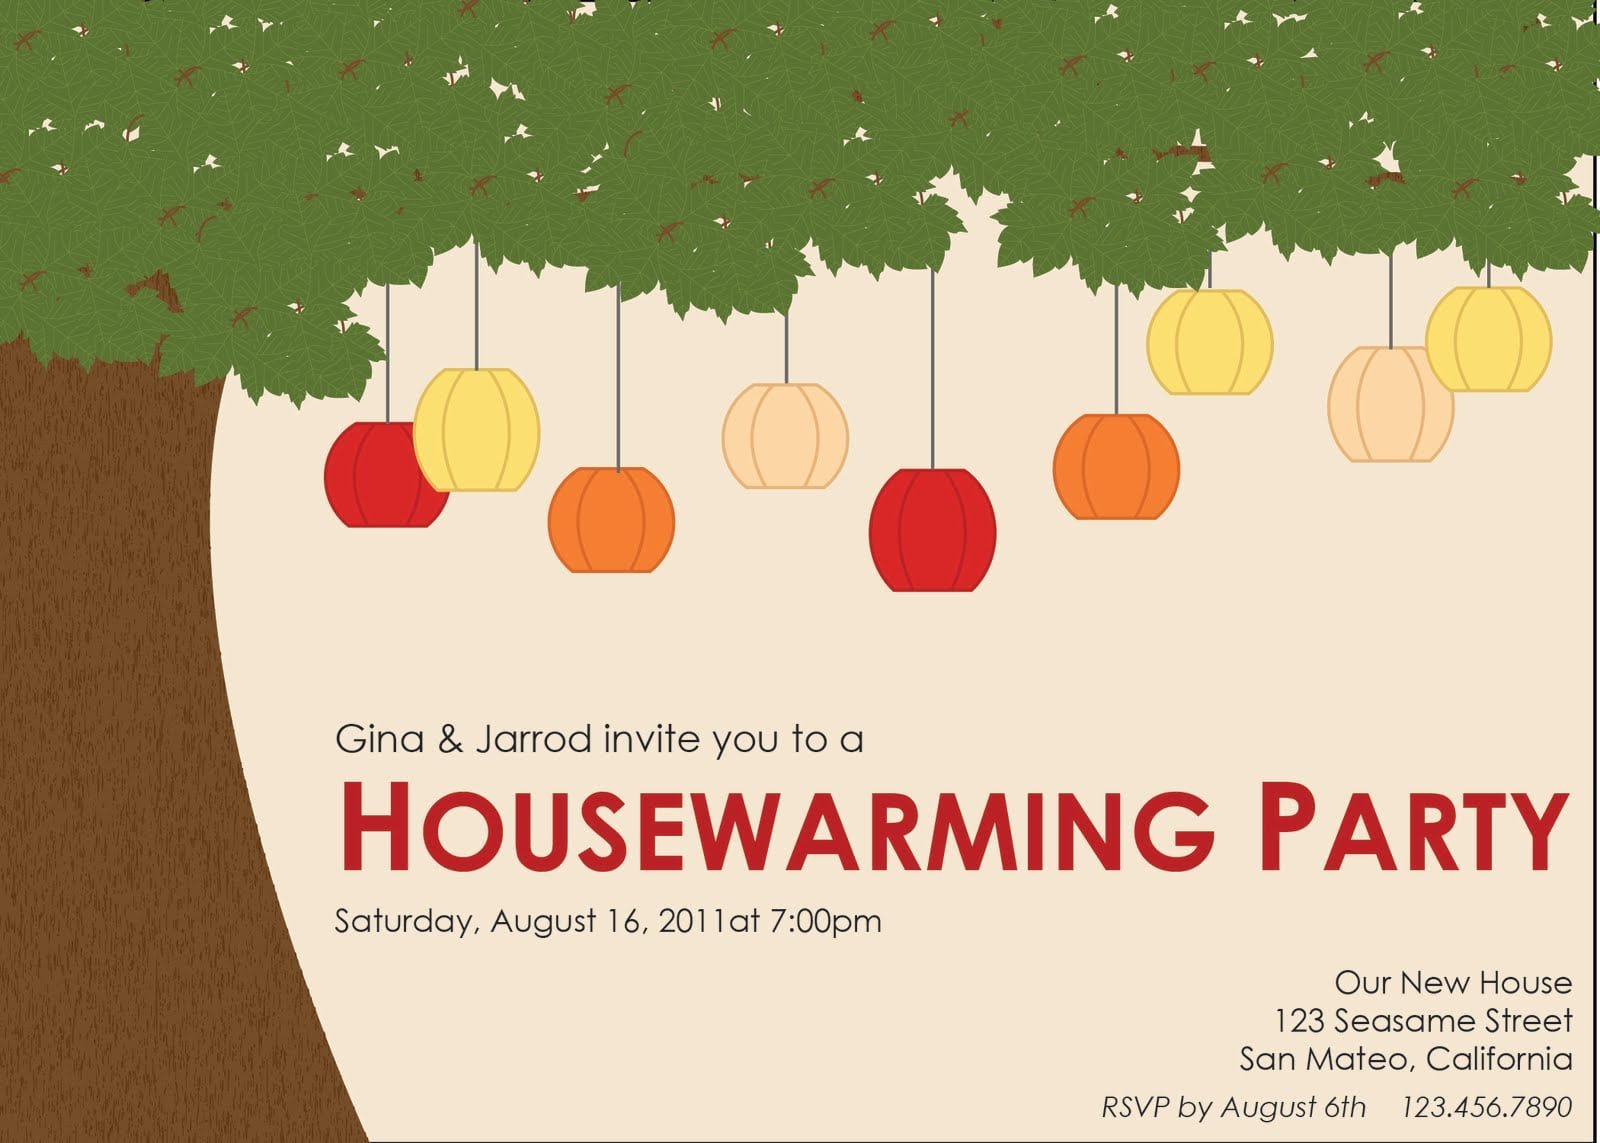 Housewarming Invitation. Invite to House warming Party. Housewarming Party картинка.